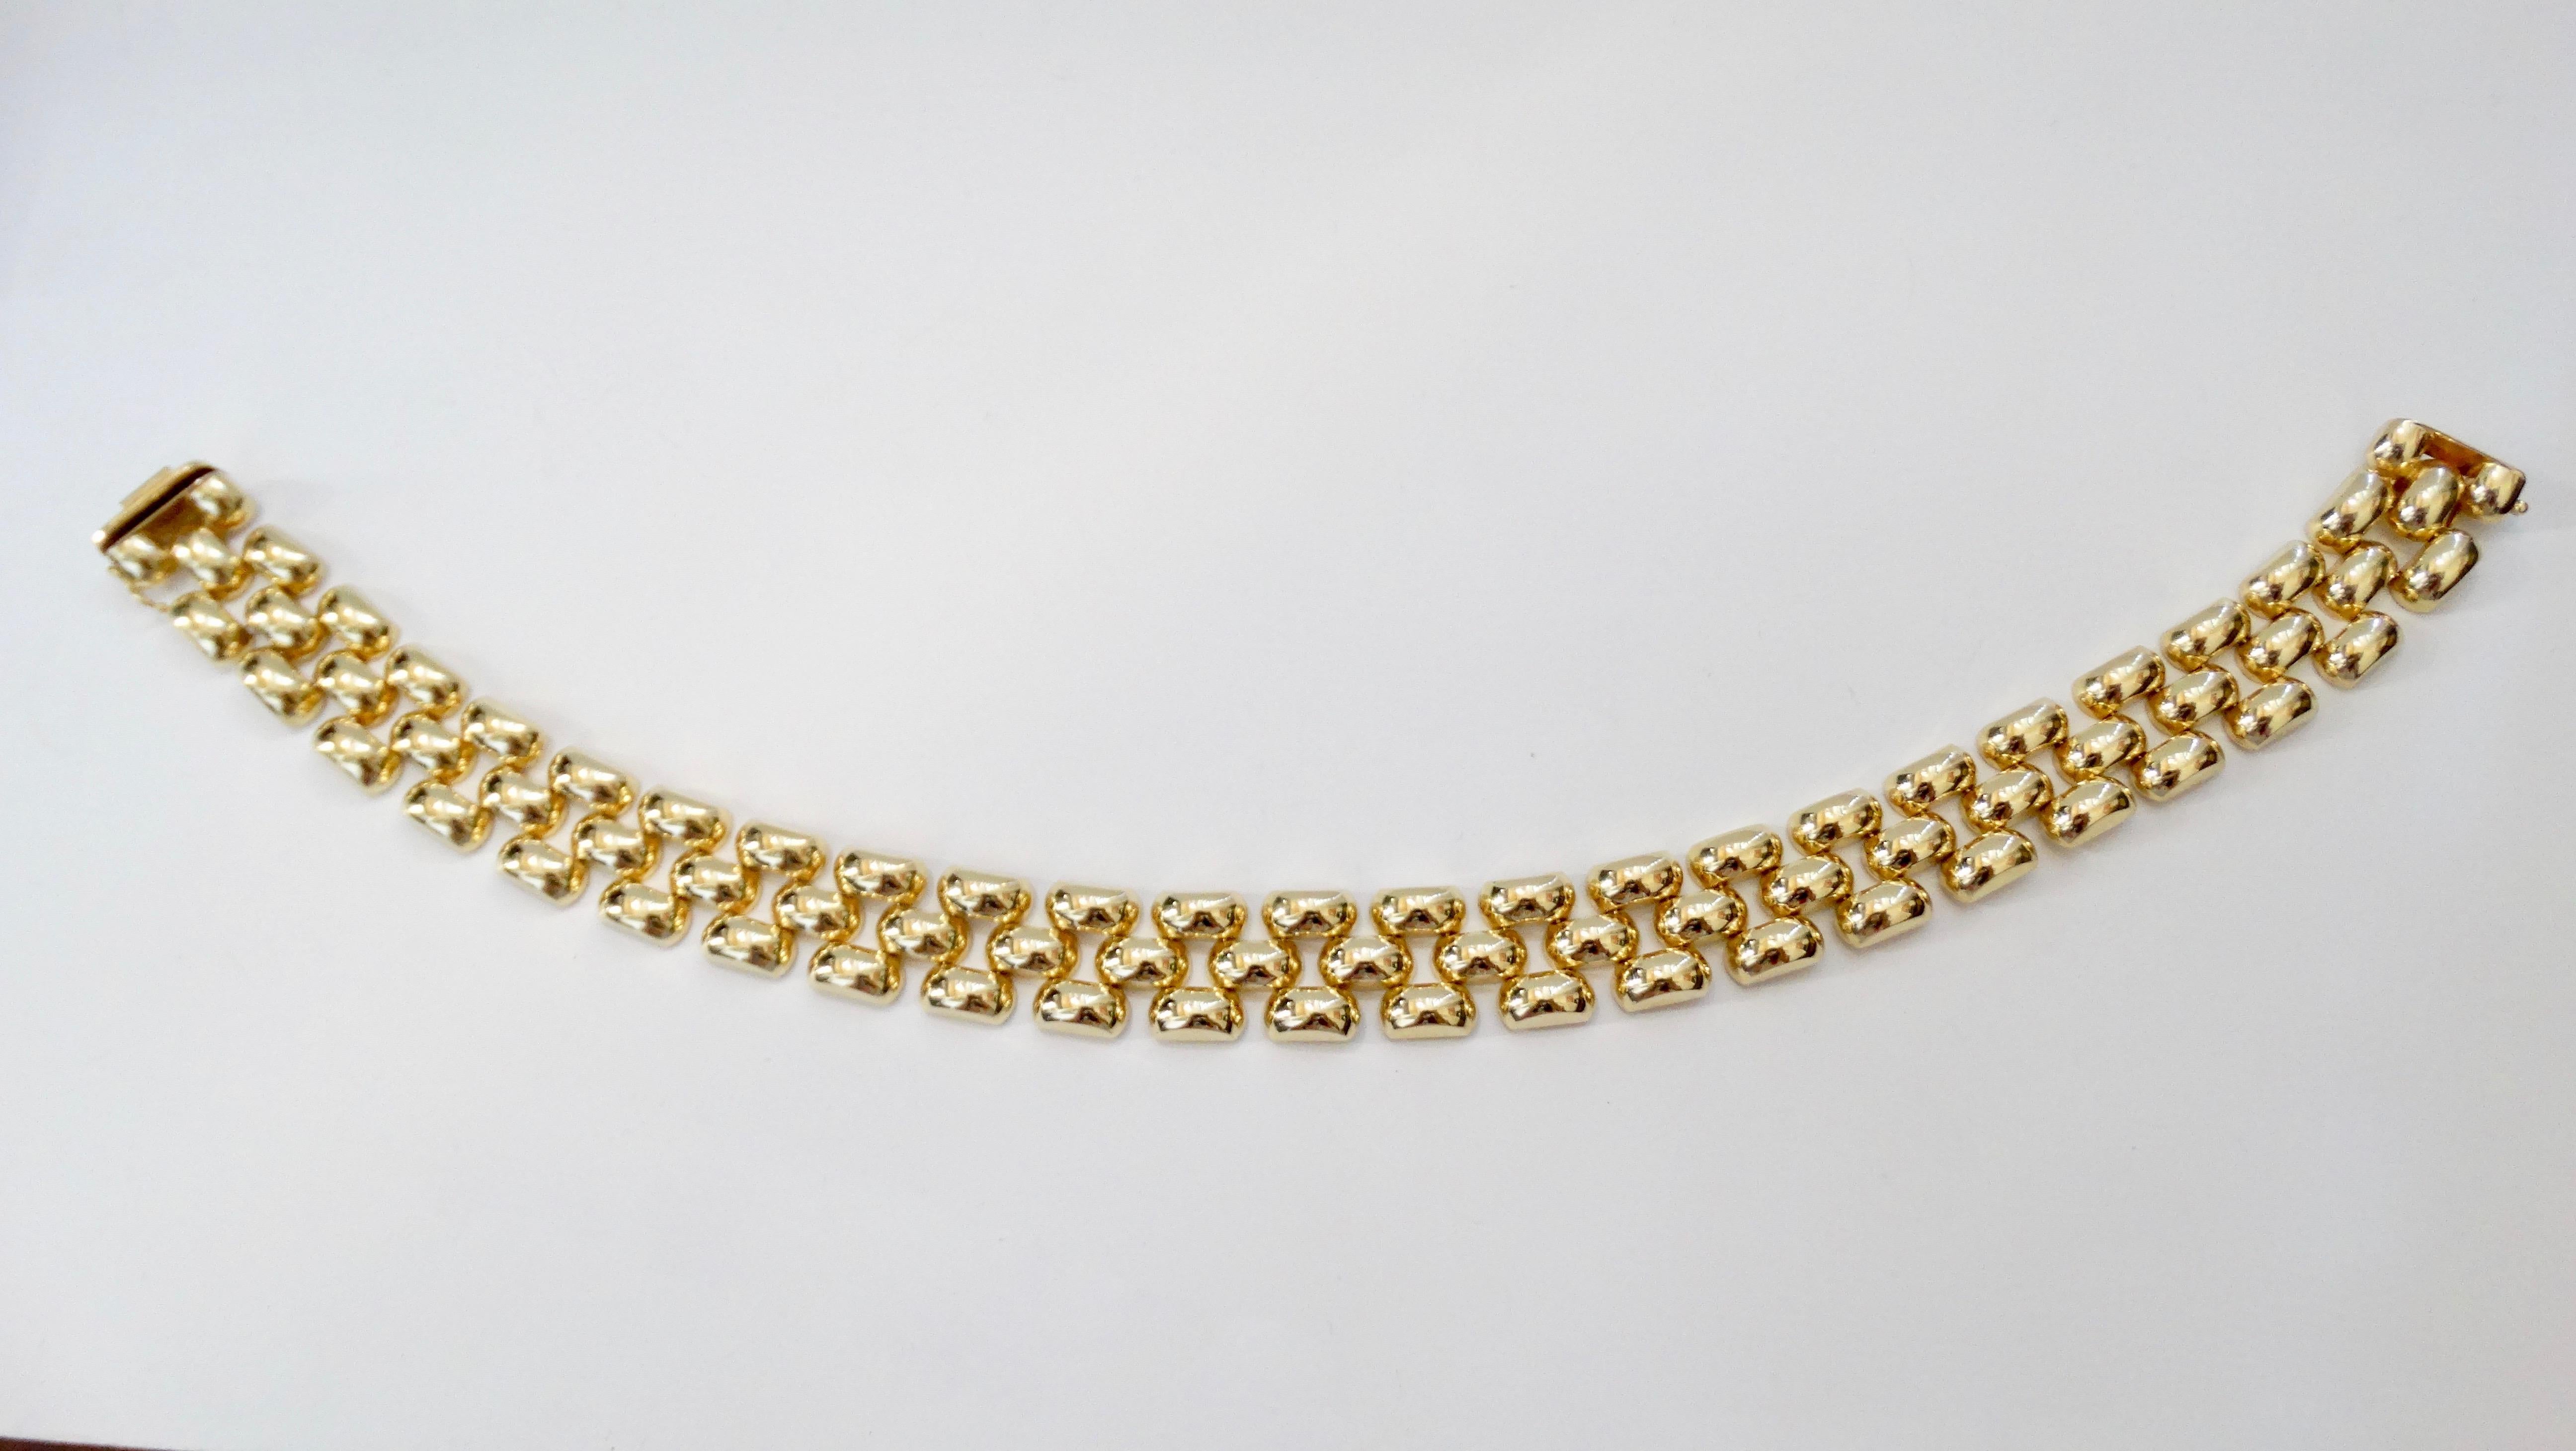 Gorgeous late 20th-century panther link necklace crafted from 14k Yellow Gold. Features 3 rows of links with very flexible movement, a box clasp closure and extra link. Total weight in grams is 97.04 and measures 17.5